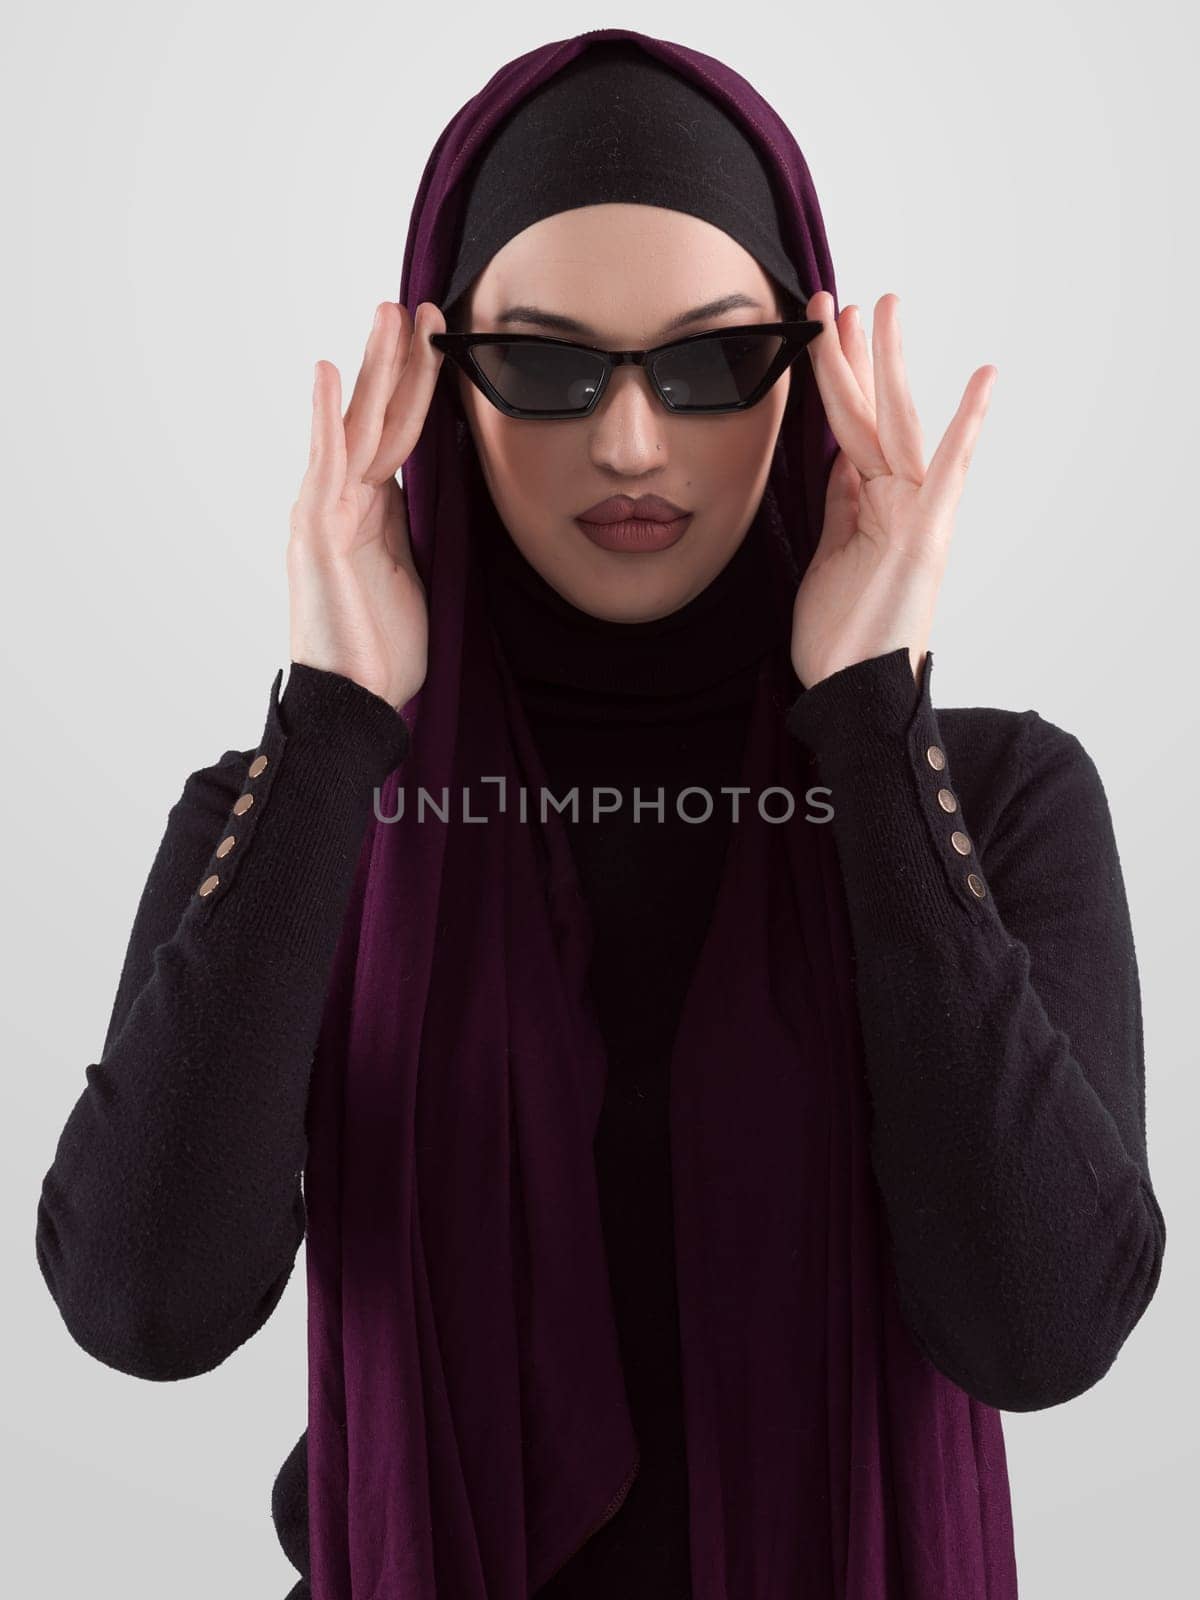 Portrait of beautiful stylish young muslim woman wearing black hijab and sunglasses as modern eastern fashion concept posing on white background. by dotshock